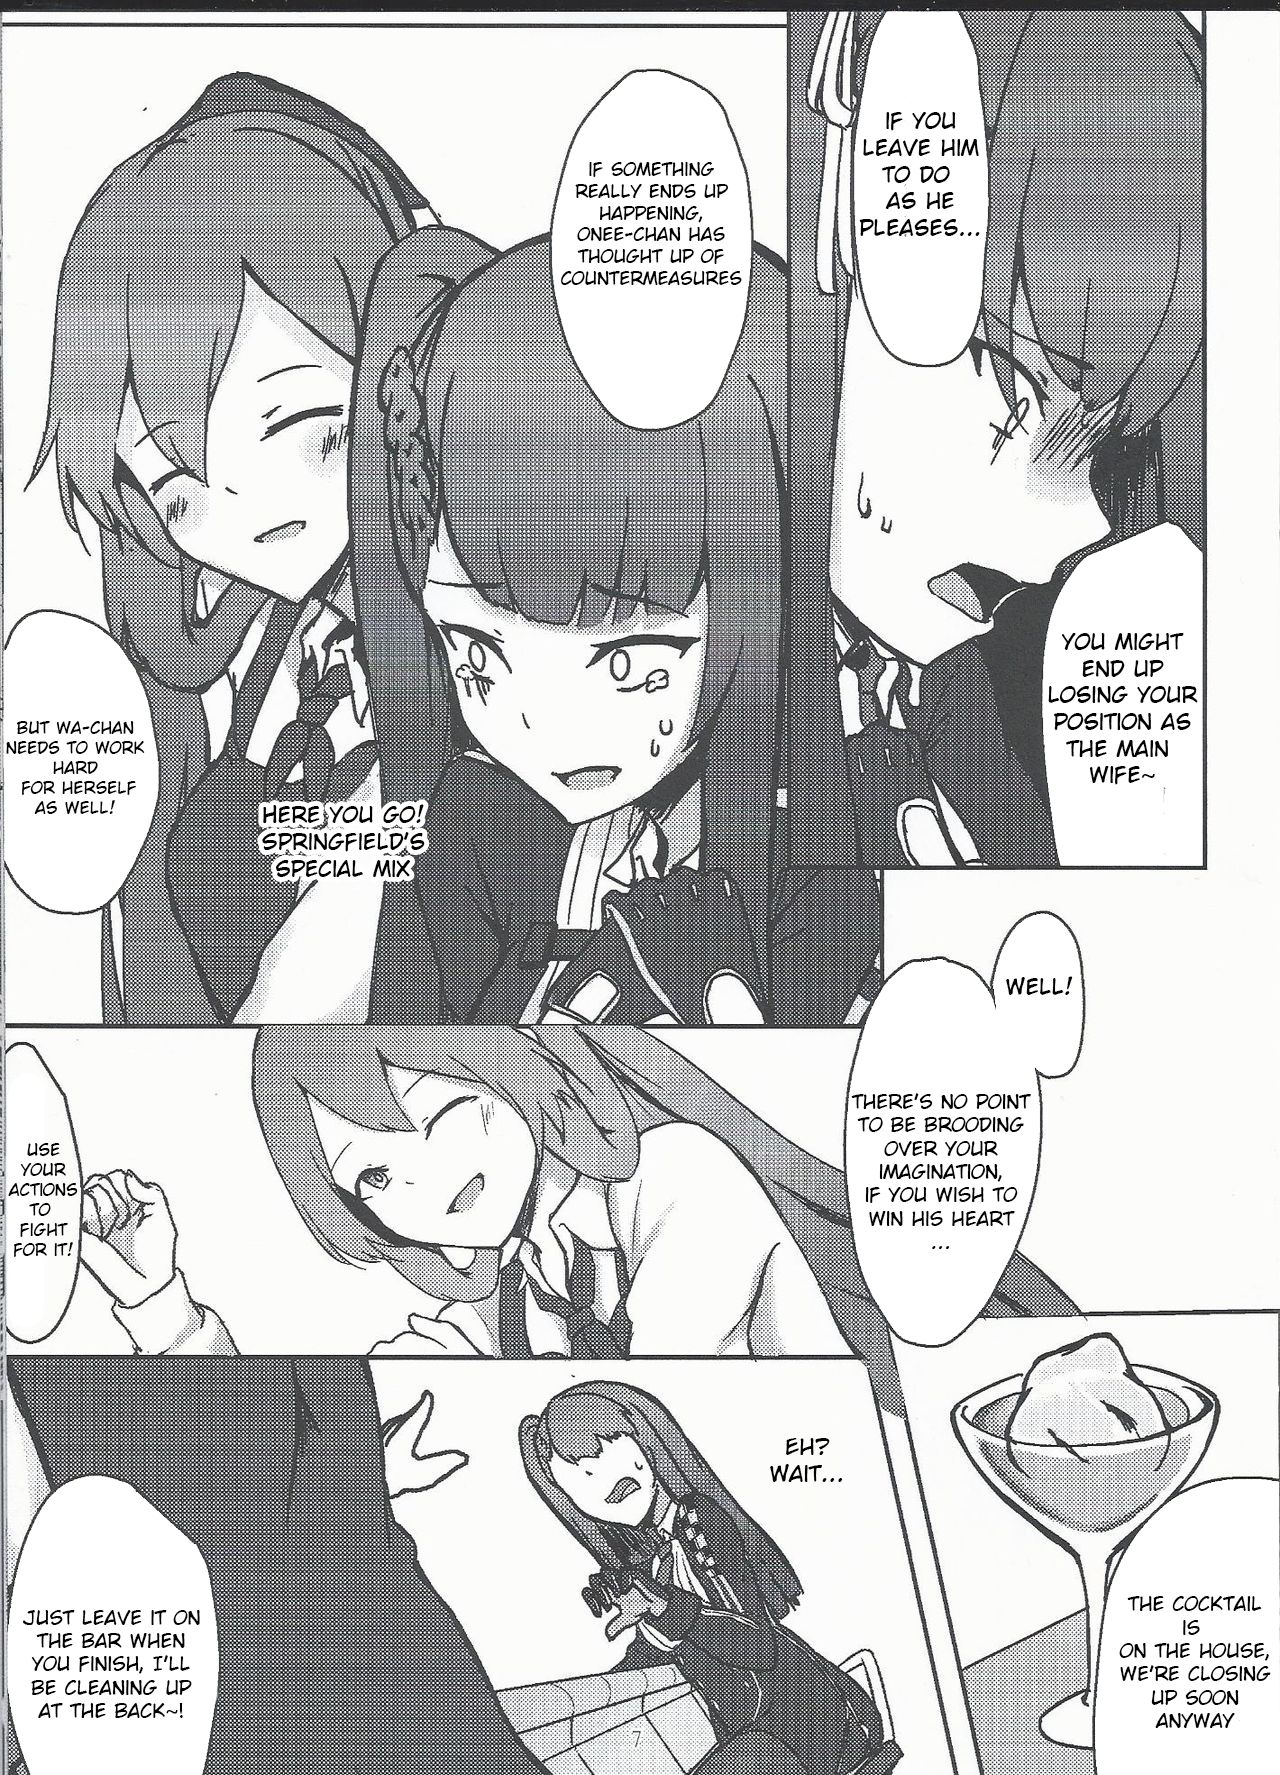 (FF32) [Sumi (九曜)] I don't know what to title this book, but anyway it's about WA2000 (Girls Frontline) [English] page 6 full